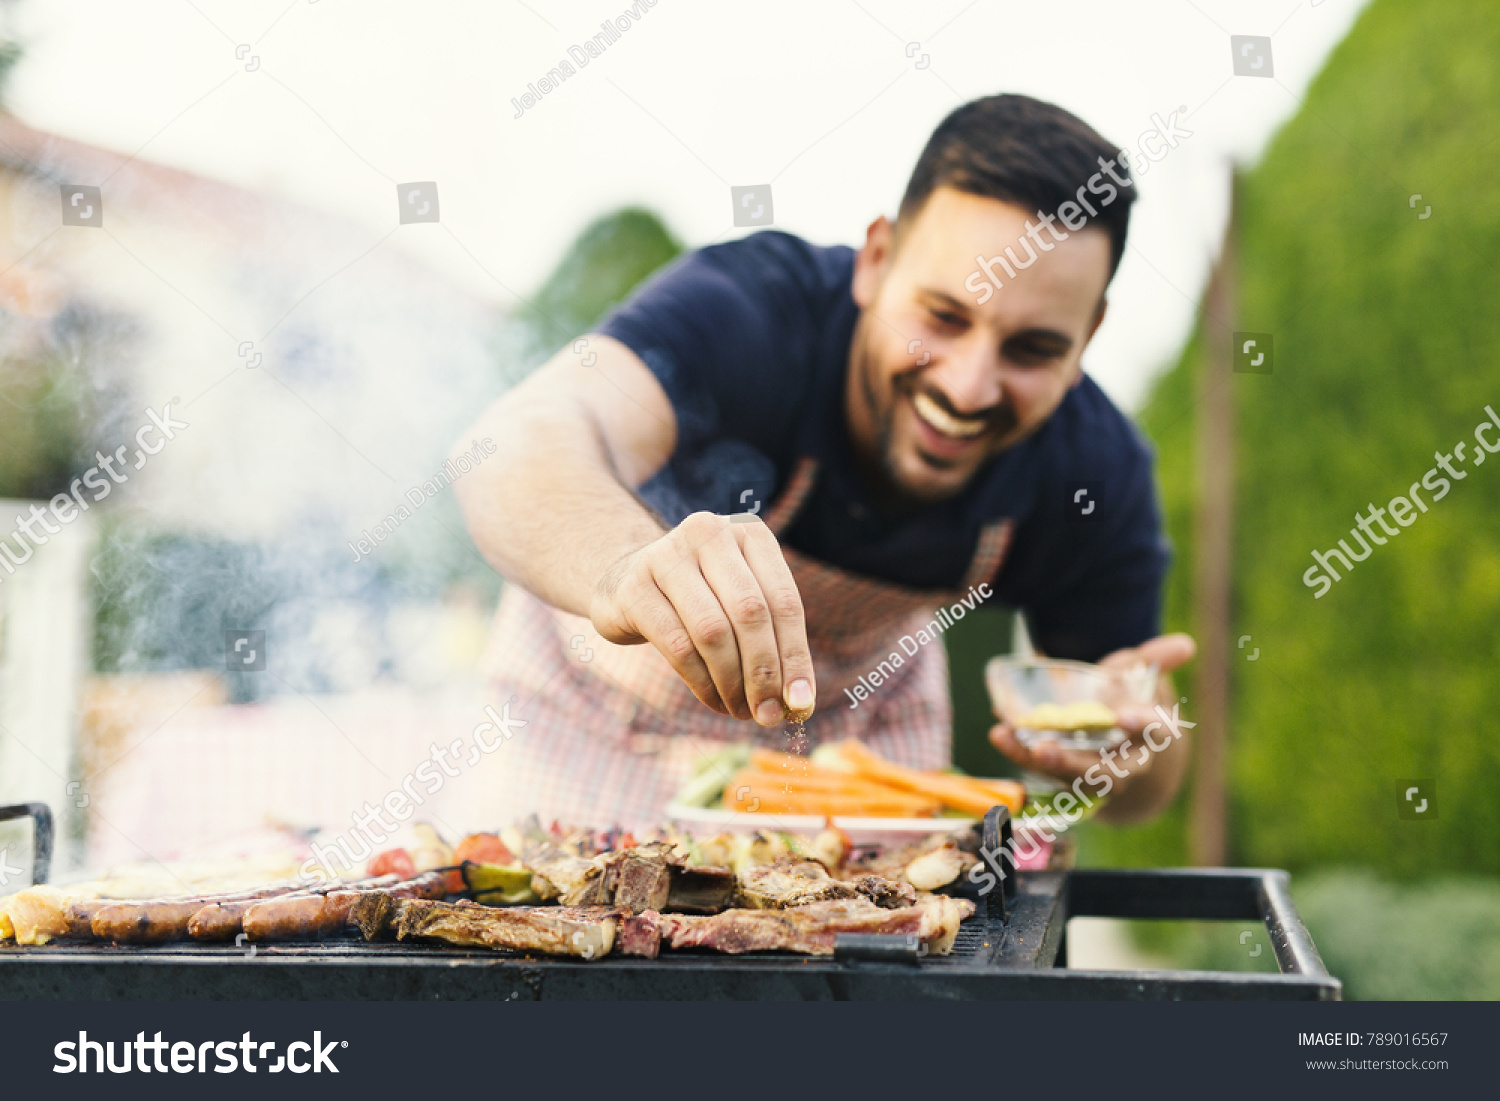 Smiling man seasoning meat on the grill #789016567